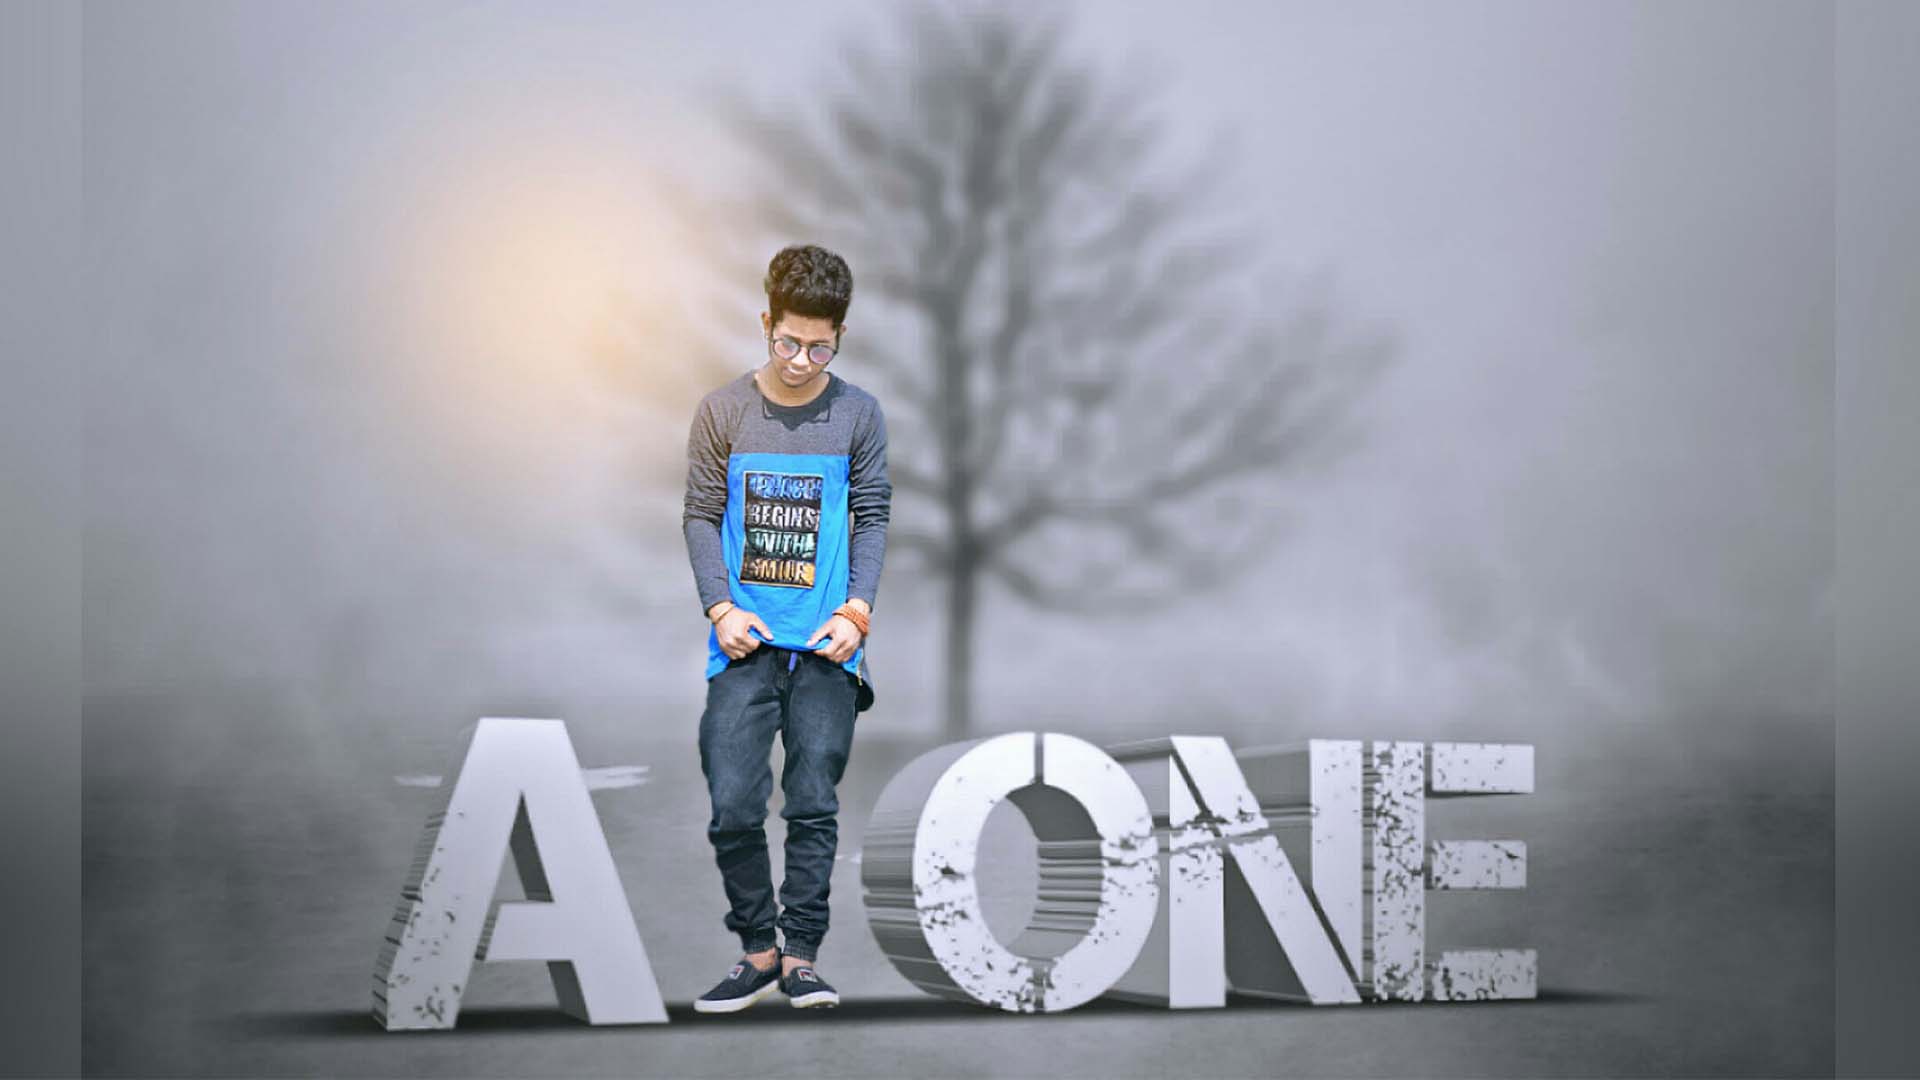 500cute boy editing background download now  PicsArt background light  room reset free download